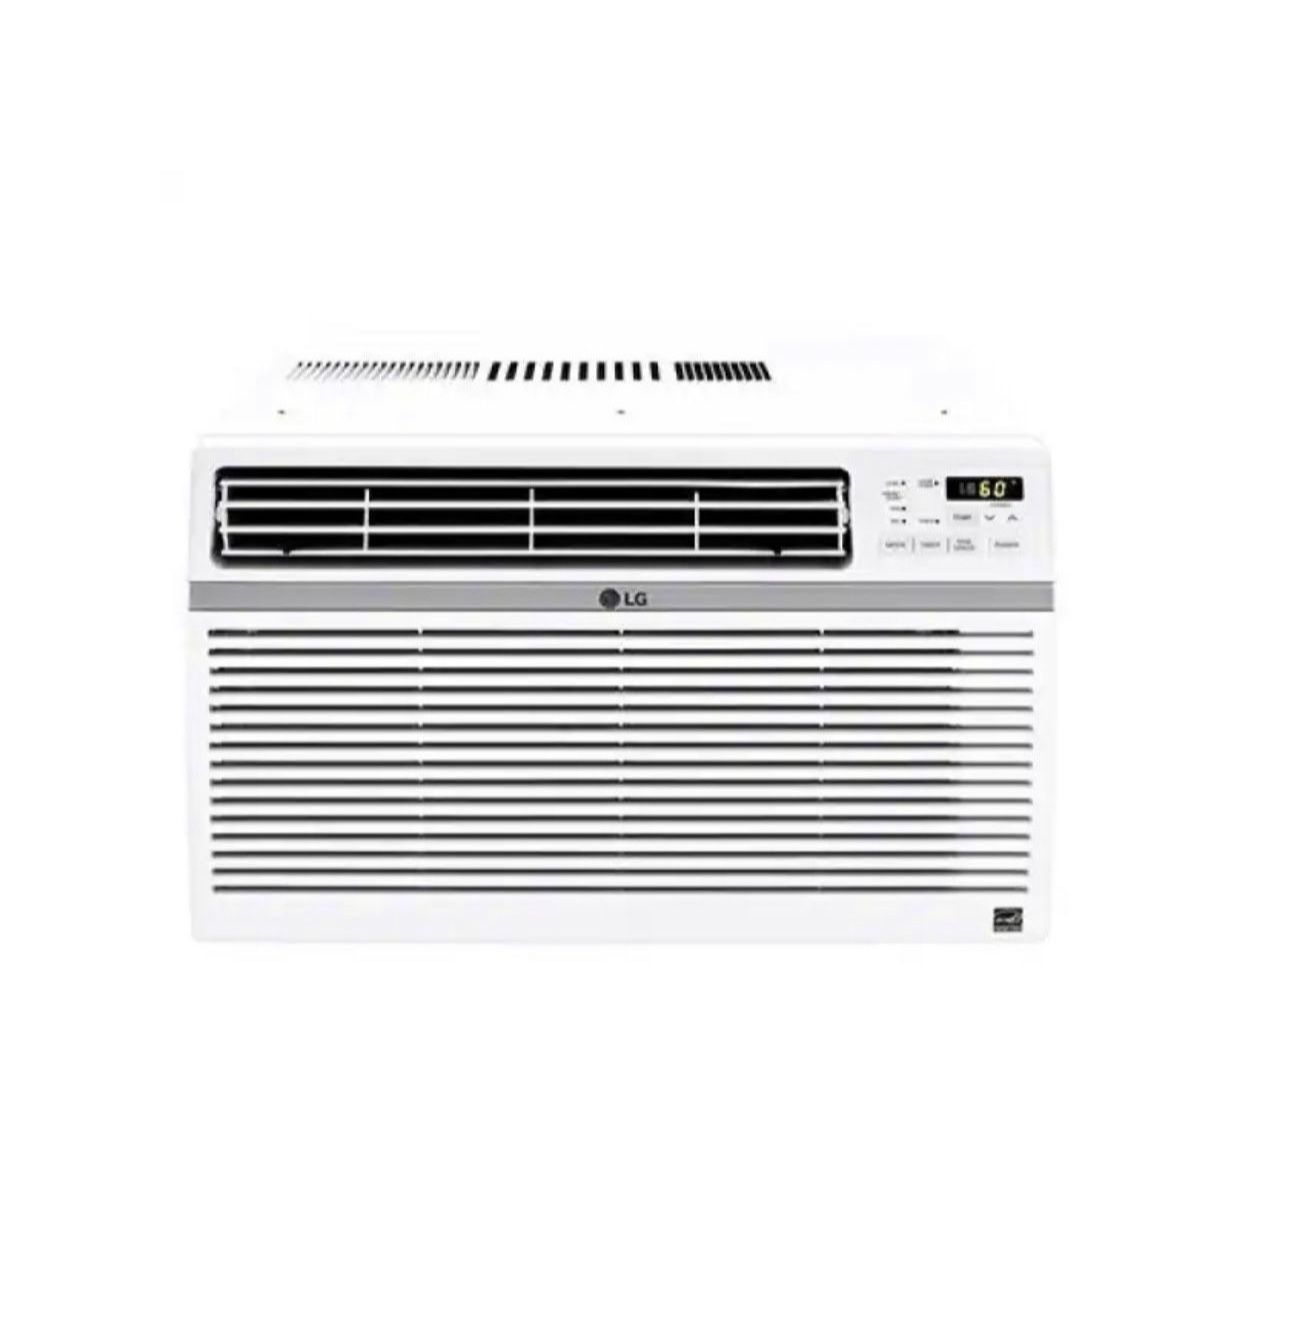 LG 10,000 BTU 115-Volt Window Air Conditioner LW1016ER with ENERGY STAR and Remote in White